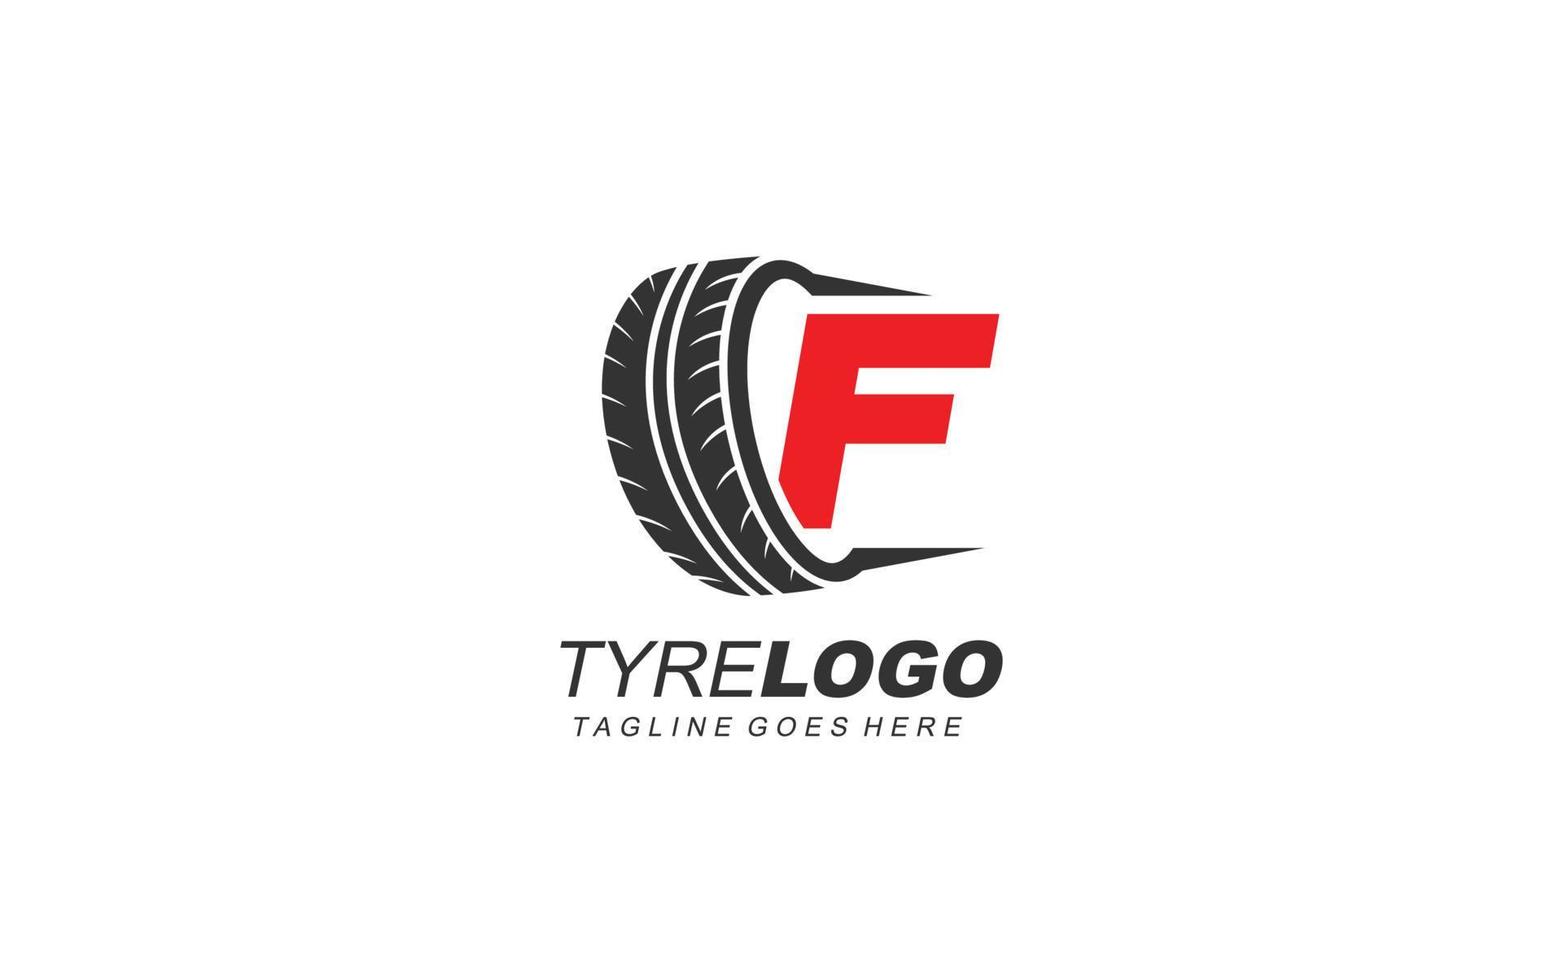 F logo tyre for branding company. wheel template vector illustration for your brand.